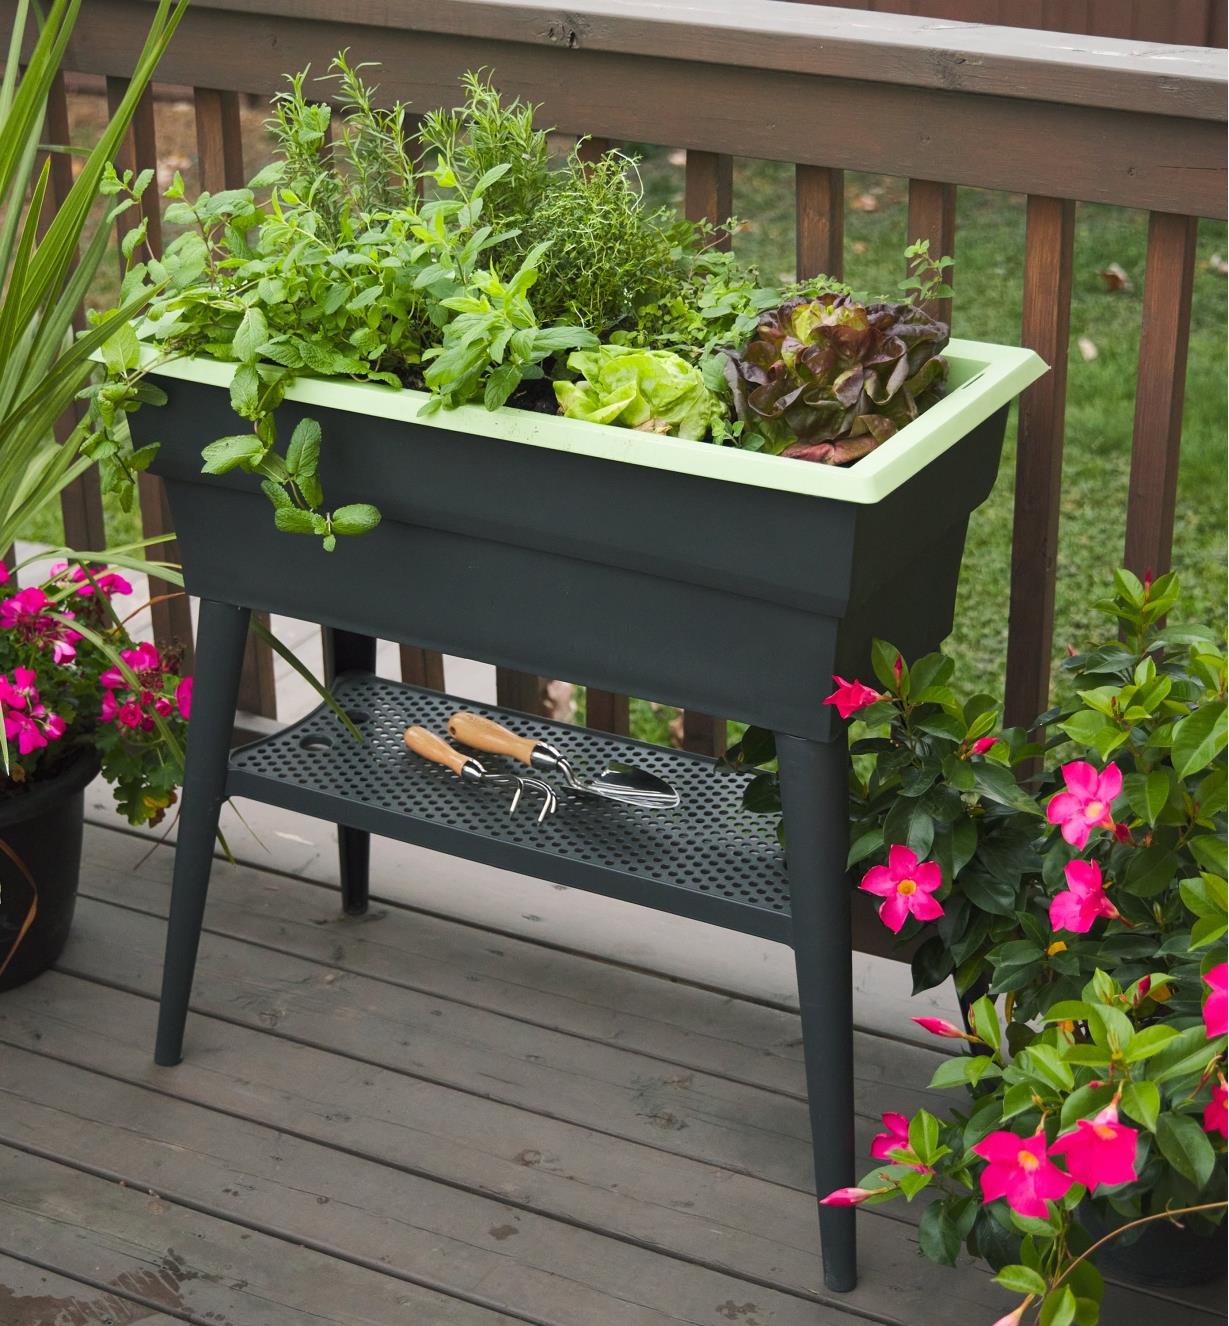 The self-watering raised planter filled with growing plants sits on a deck  